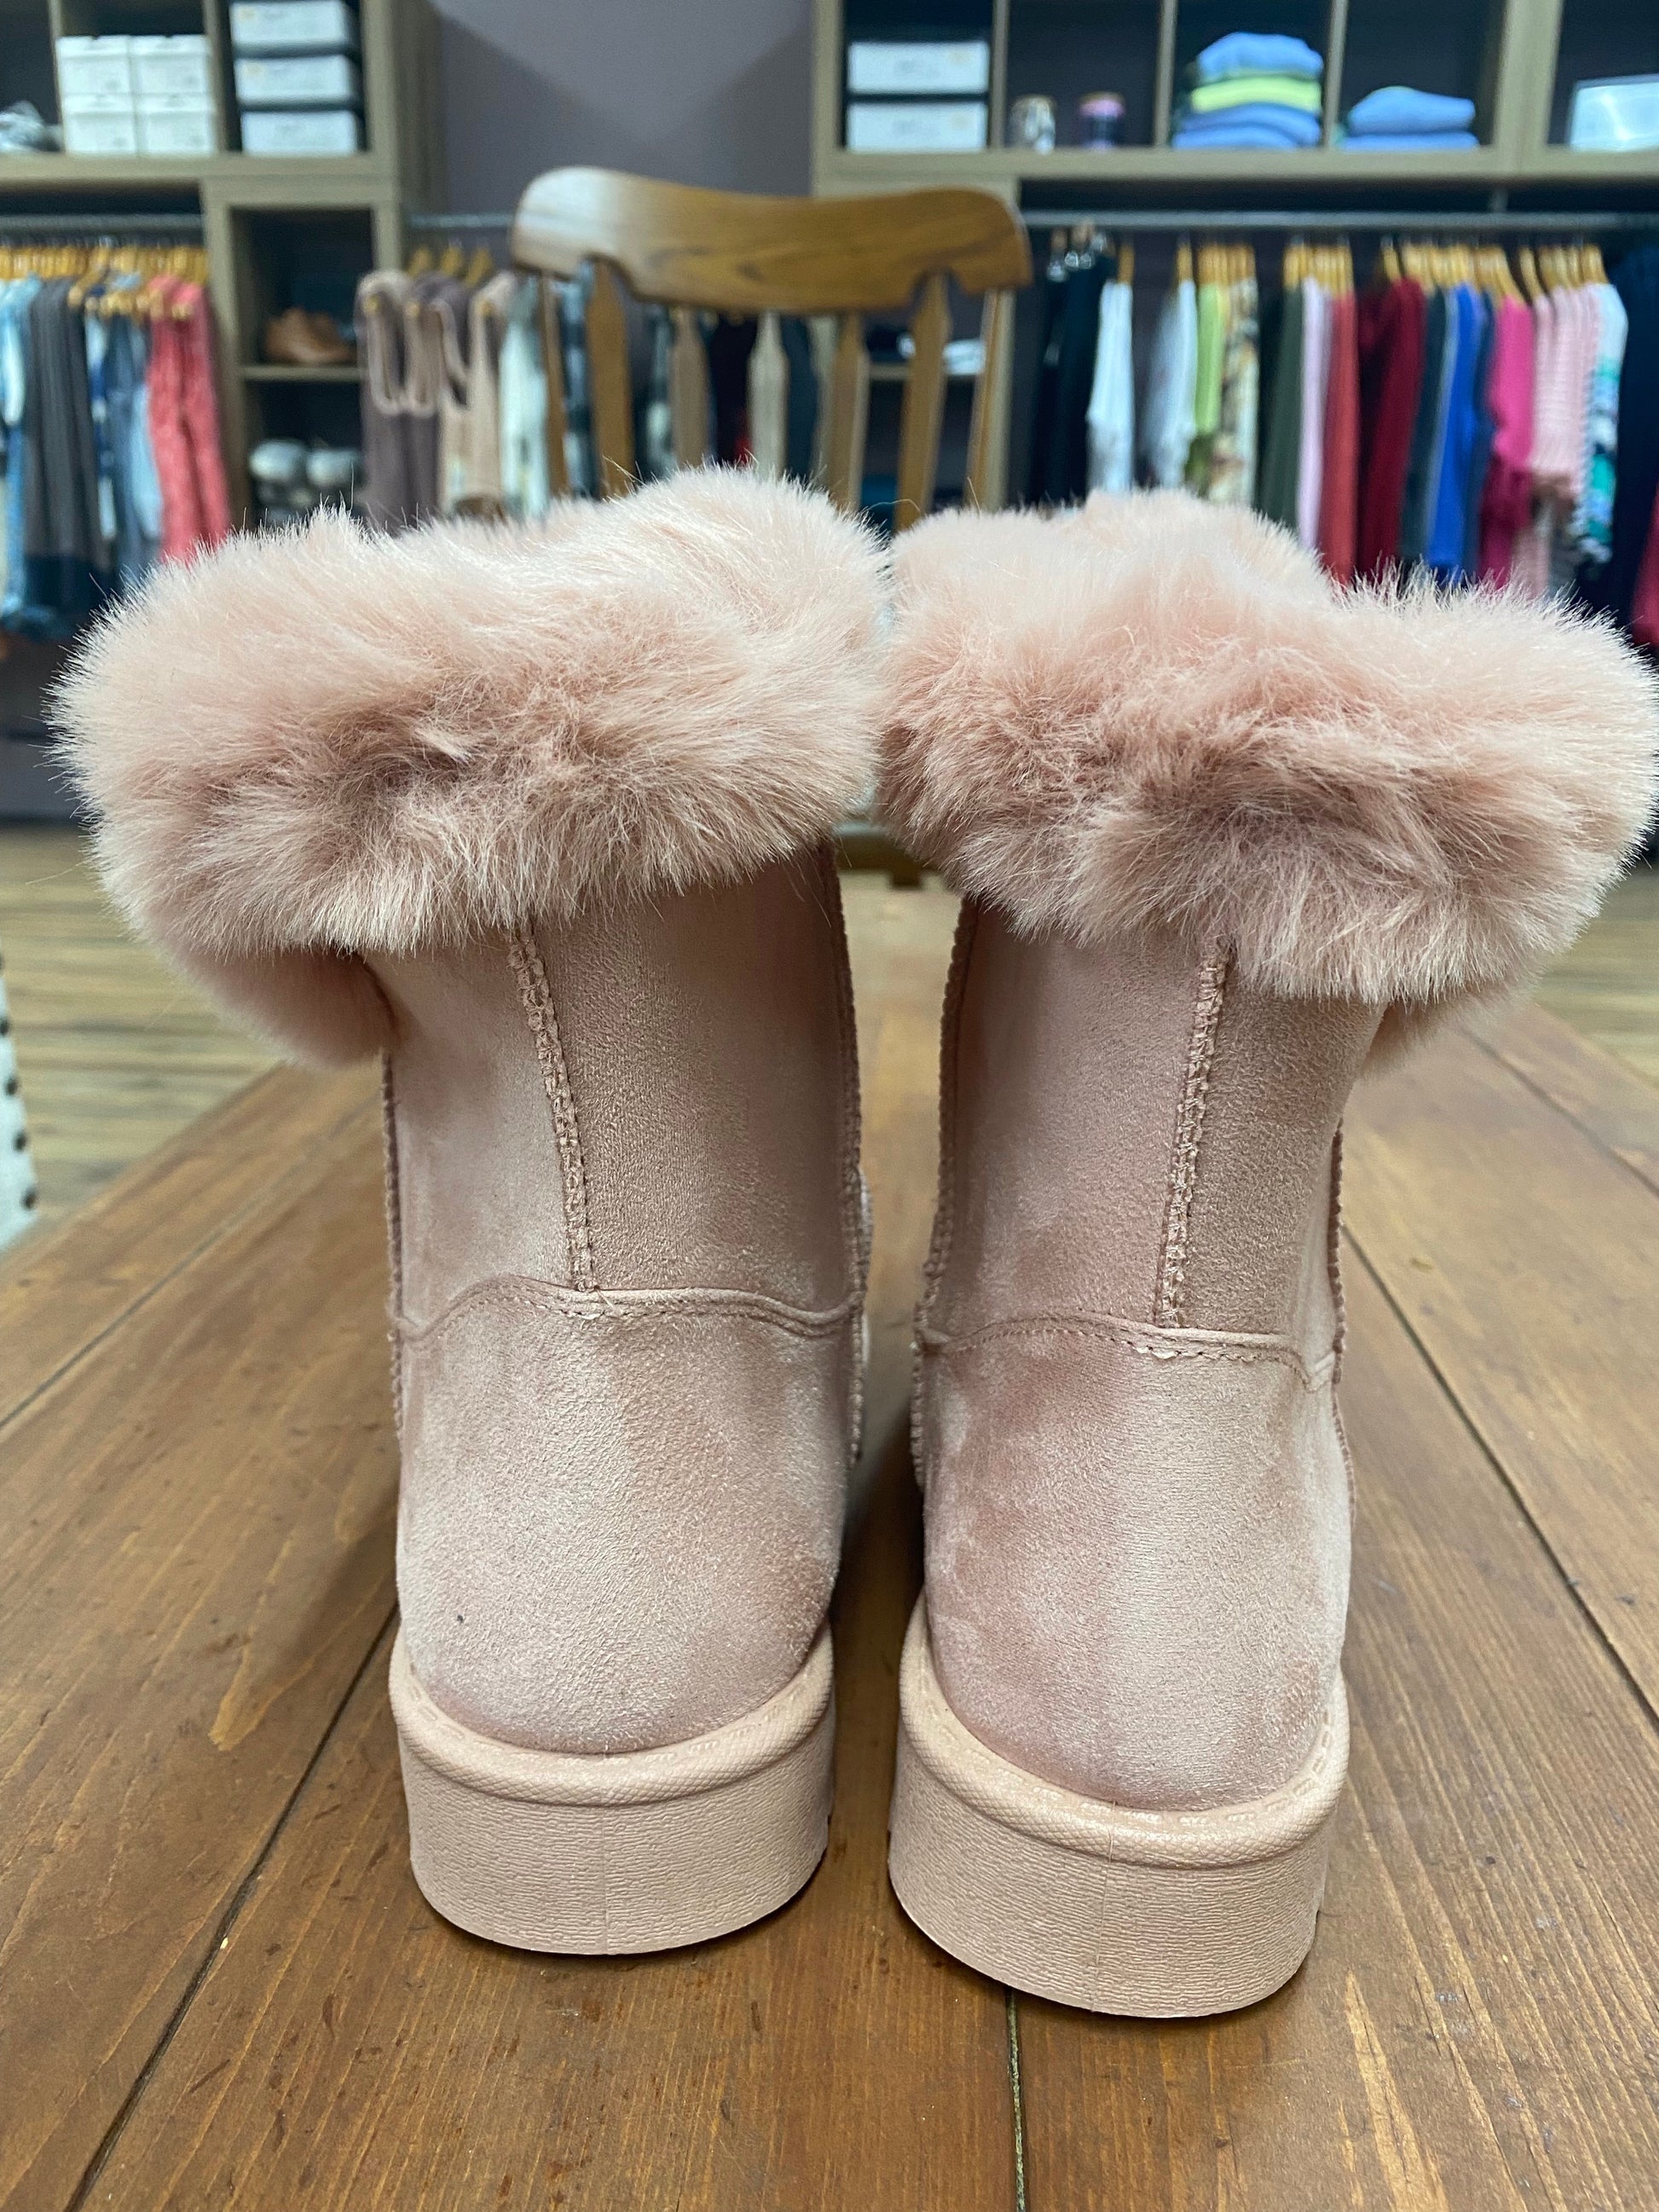 Charlie Paige Fur Cuff Boots - Whitt & Co. Clothing